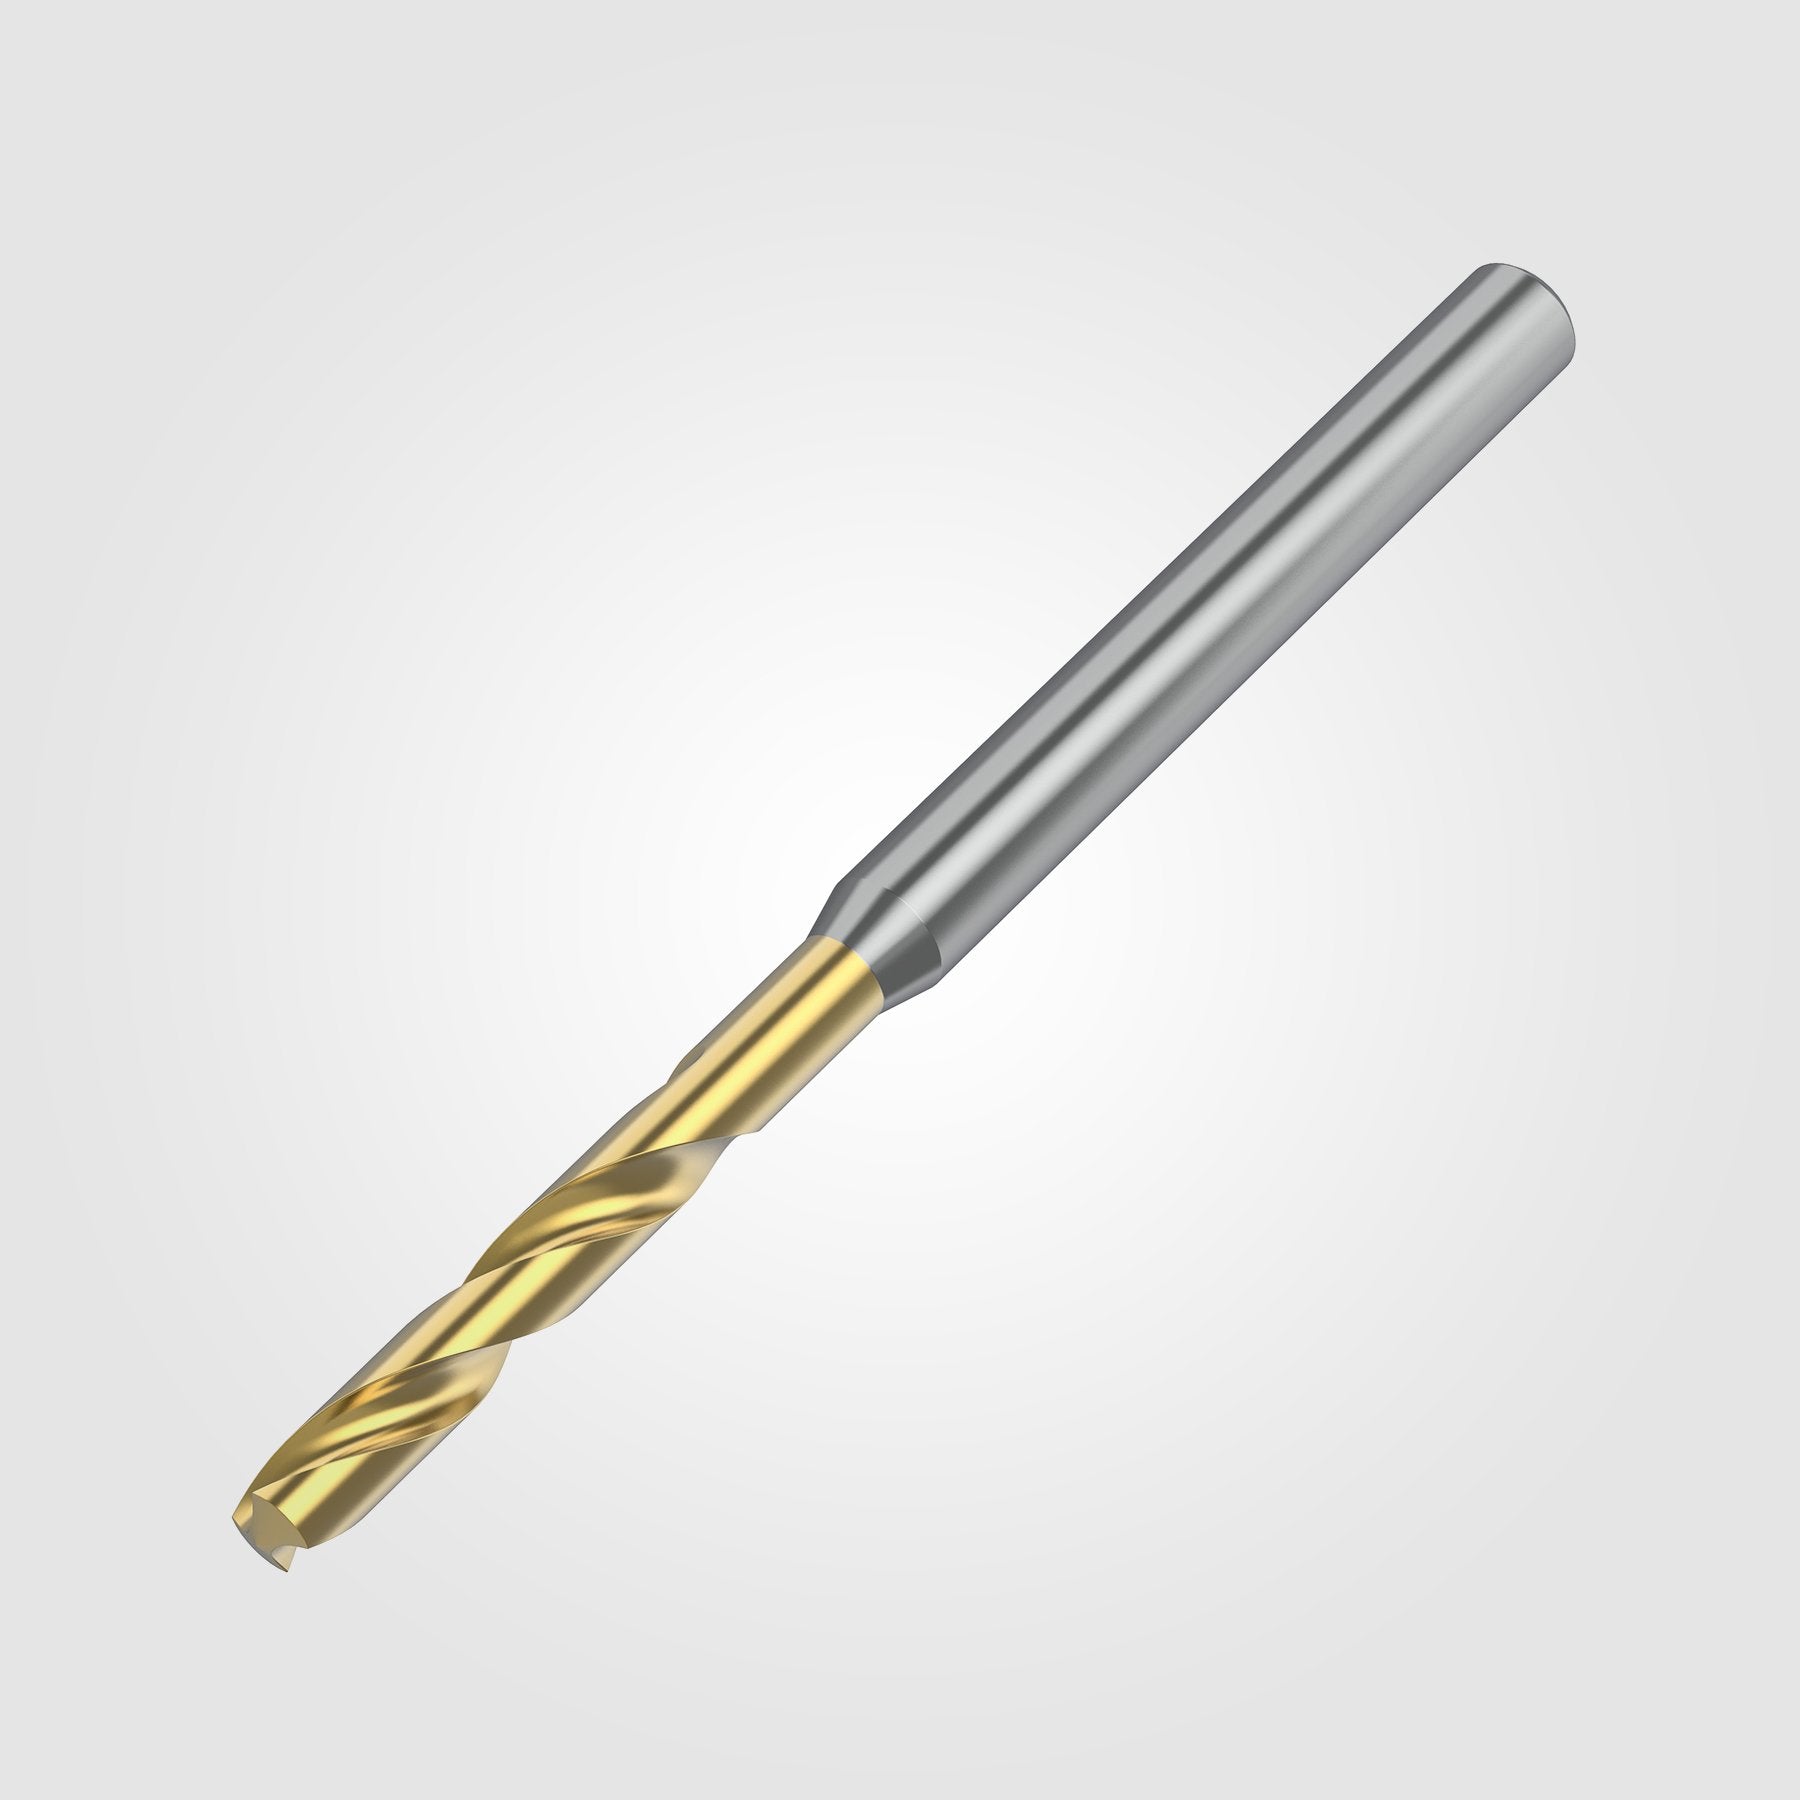 GOdrill (THROUGH COOLANT) | 3.9mm / .1535" / 3xD | SOLID CARBIDE DRILL | 4151116